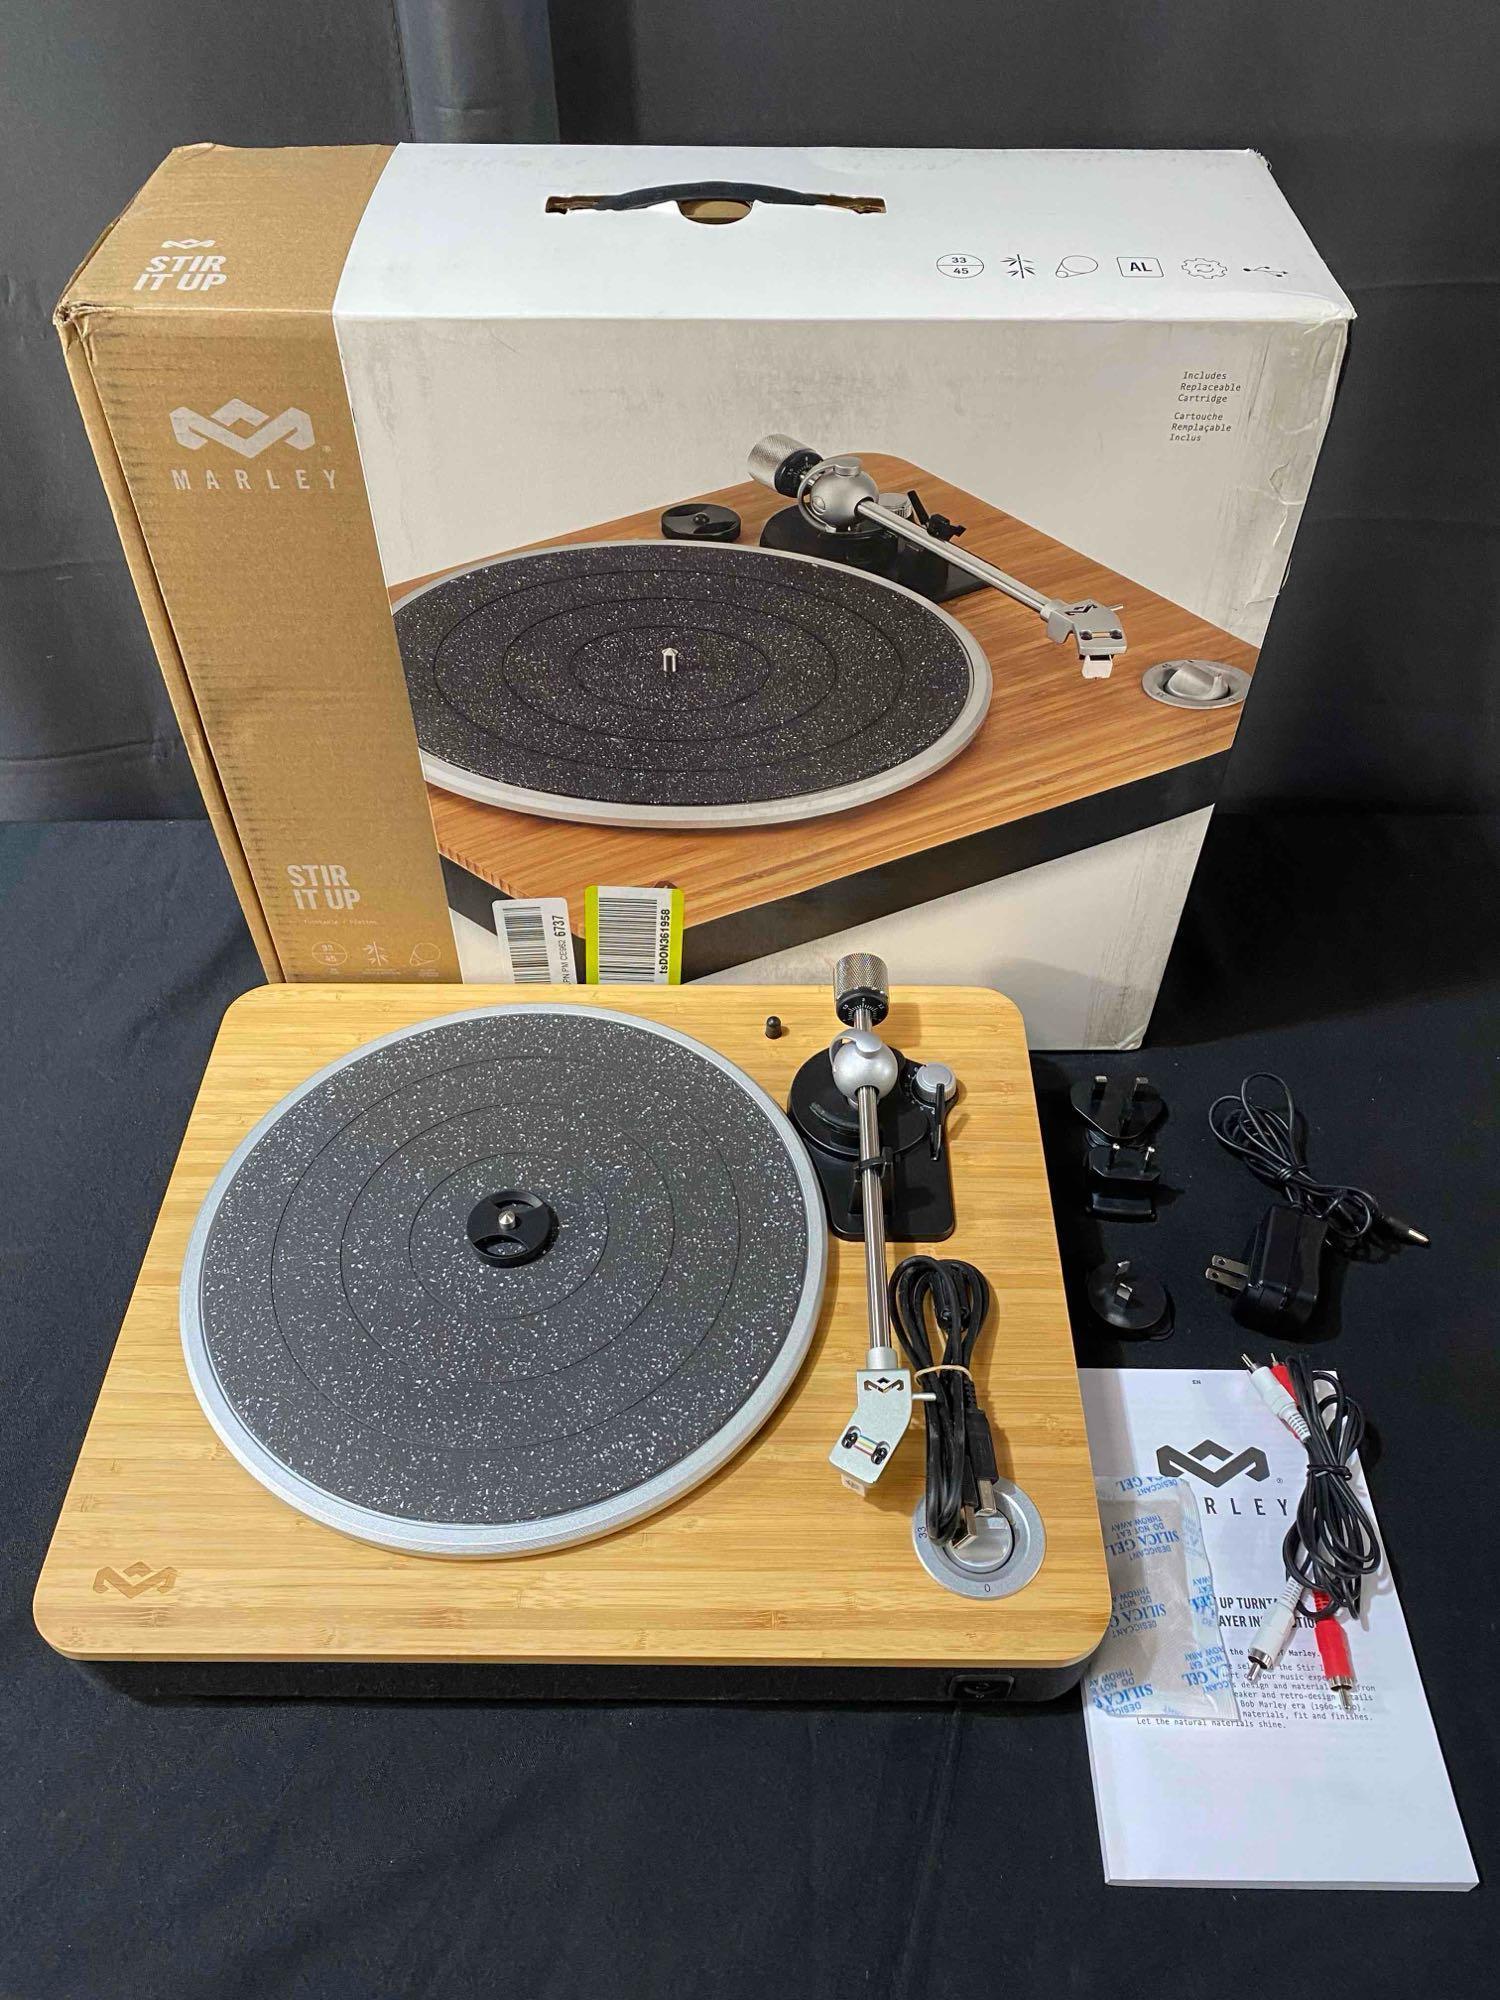 House of Marley Stir It Up Wireless Turntable